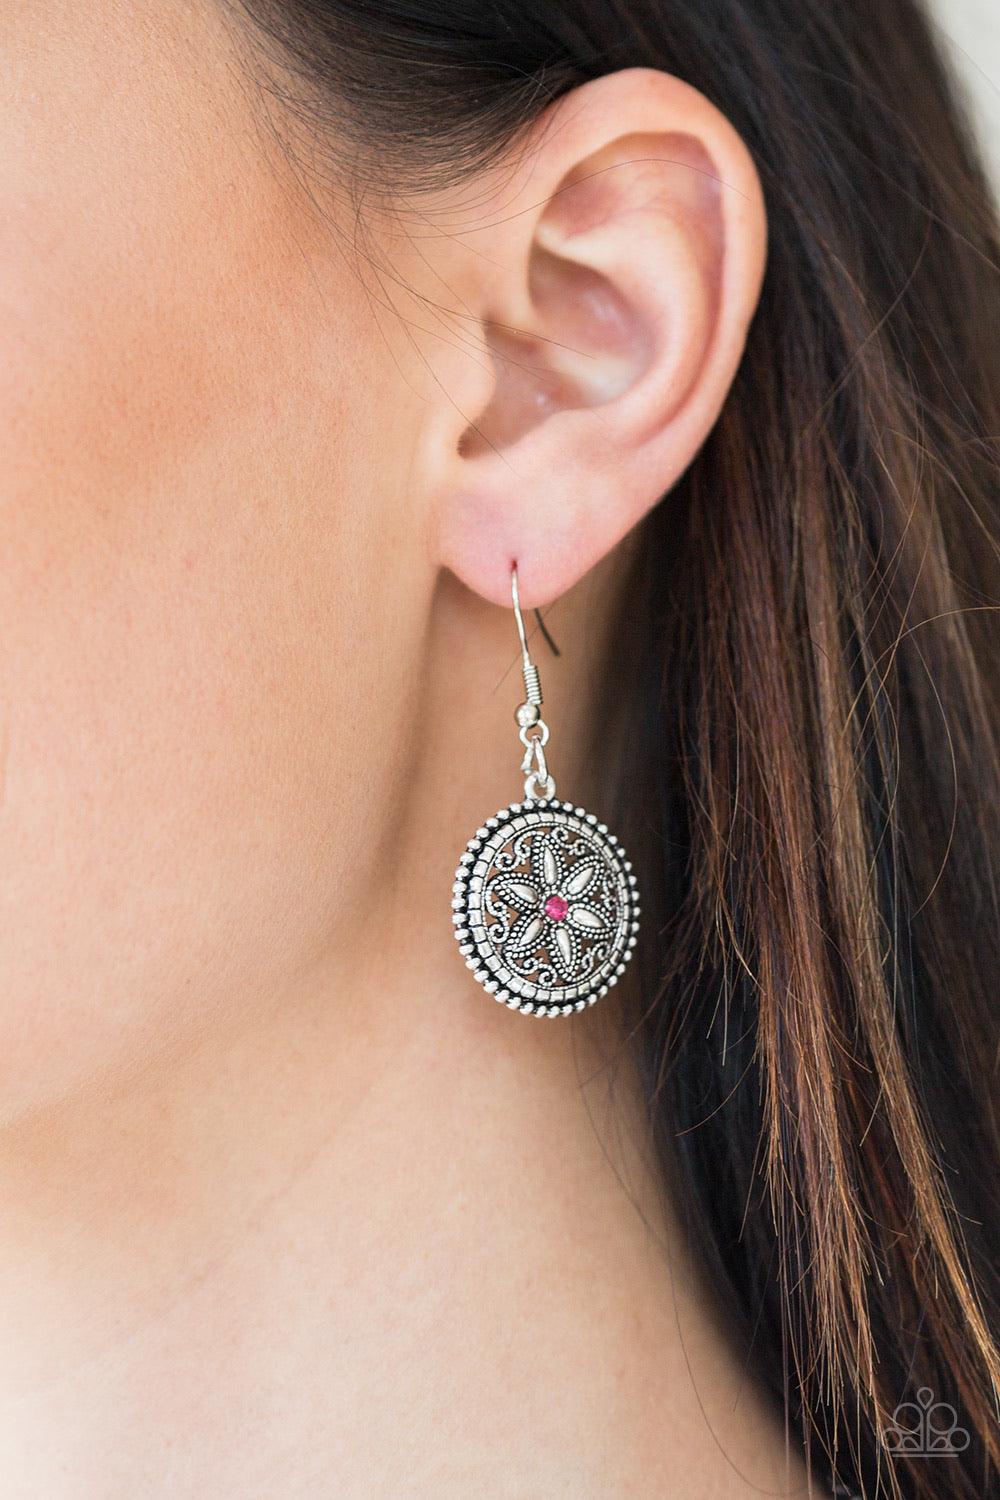 Paparazzi Accessories Written In The STAR LILLIES - Pink Dotted with glittery pink rhinestone centers, floral silver frames gradually increase in size as they link below the collar for a whimsical look. Features an adjustable clasp closure. Jewelry